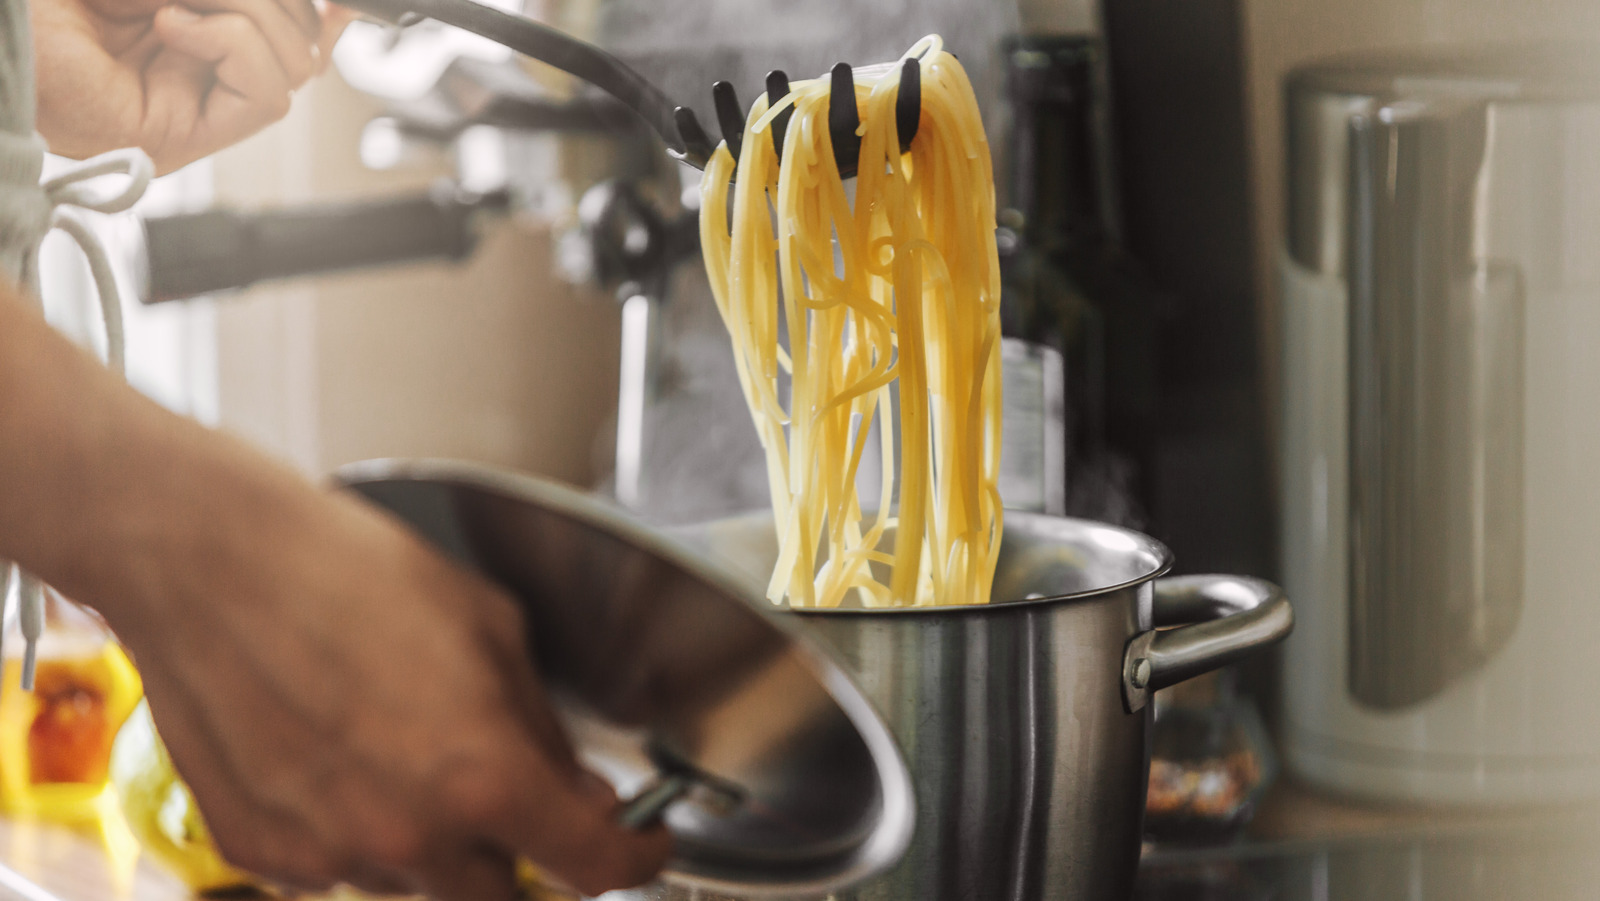 The Most Important To Stir Pasta While Cooking